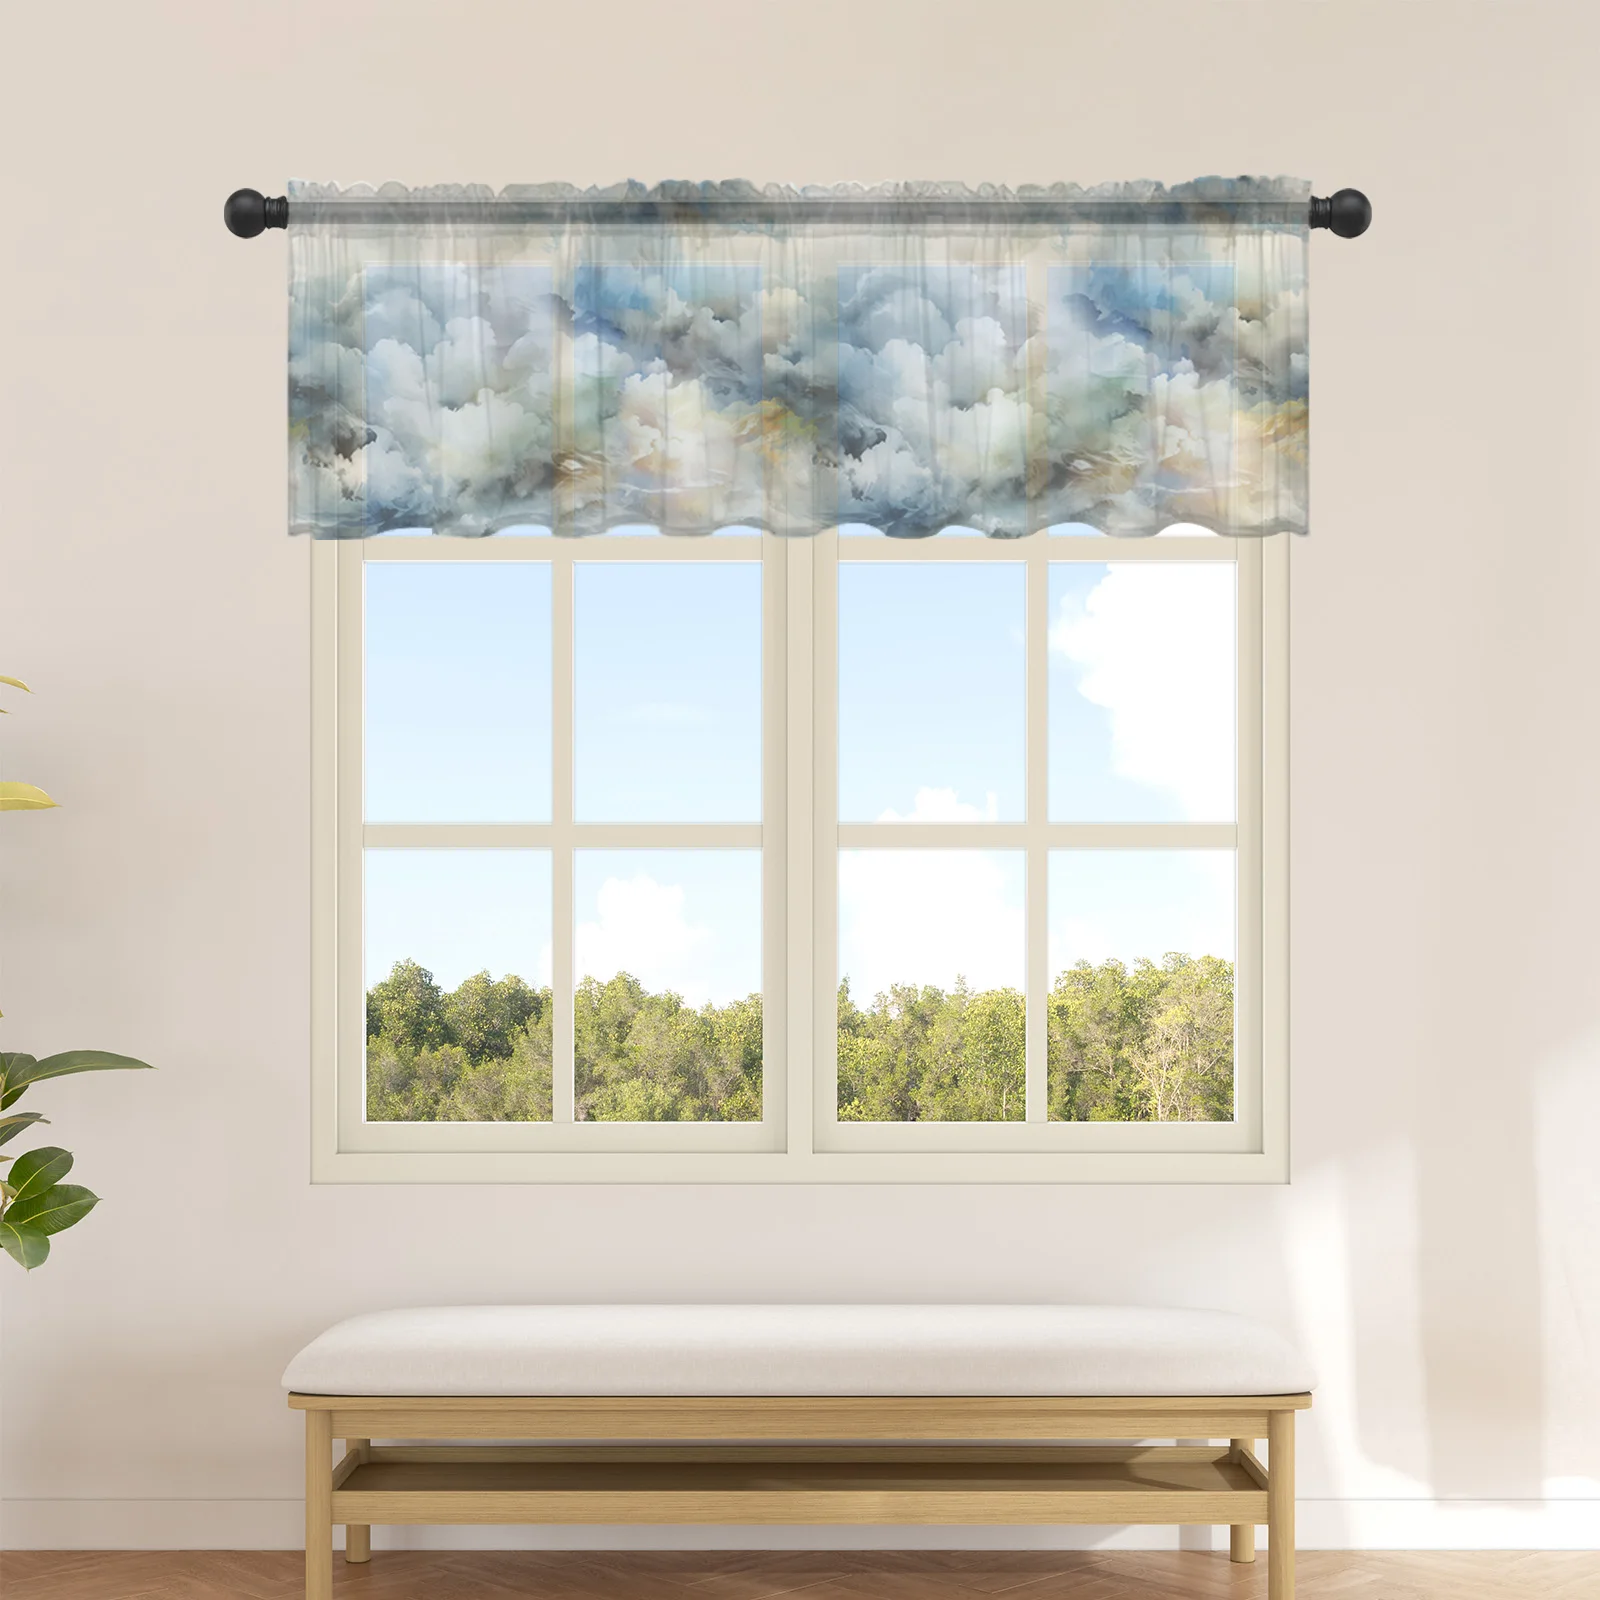 

Abstract Gradient Clouds Short Tulle Curtains for Kitchen Cafe Sheer Voile Half-Curtain for Bedroom Doorway